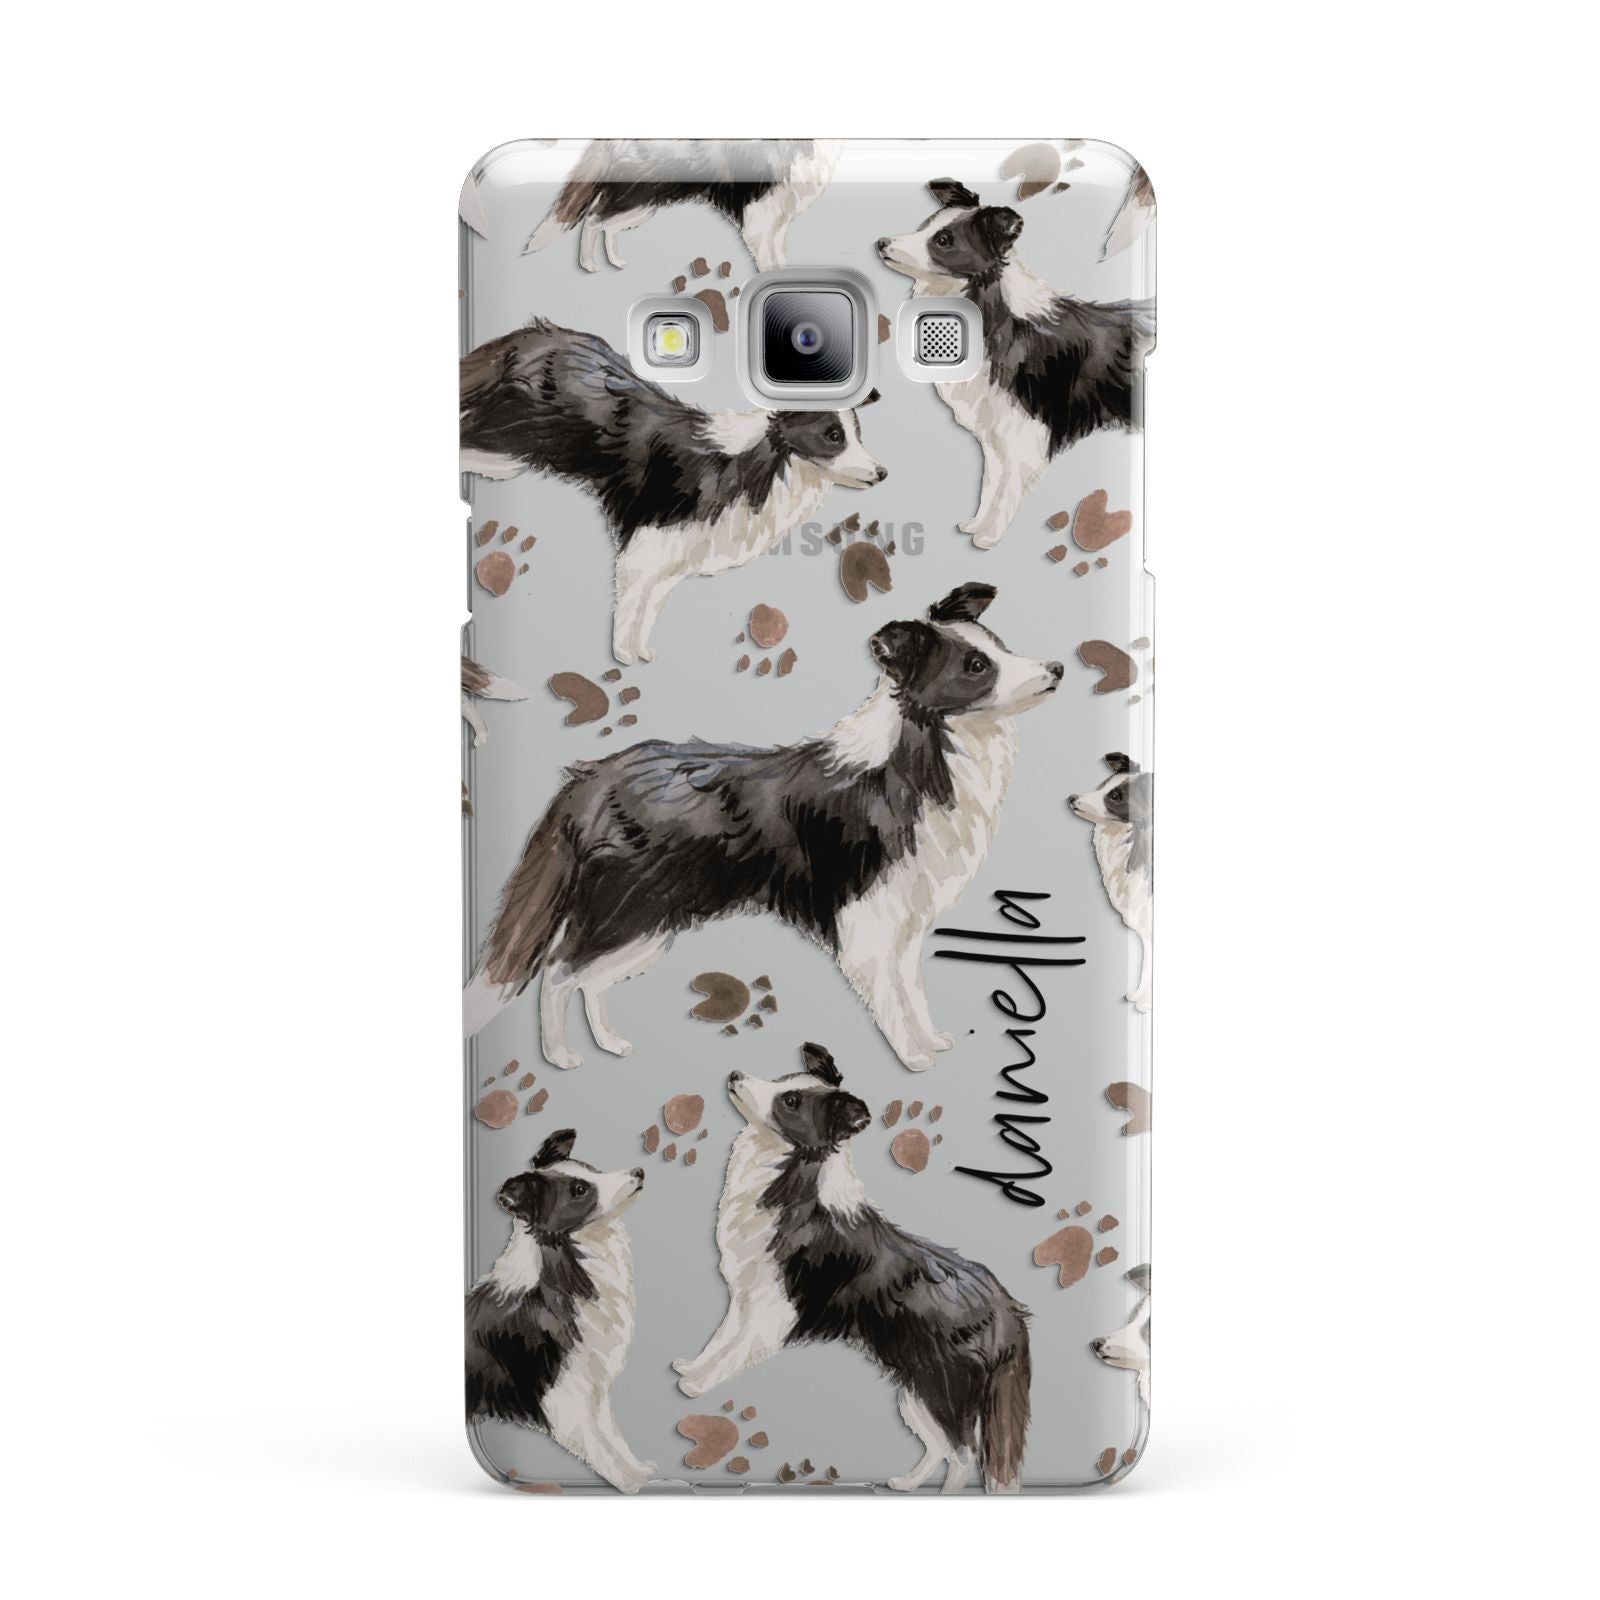 Personalised Border Collie Dog Samsung Galaxy A7 2015 Case